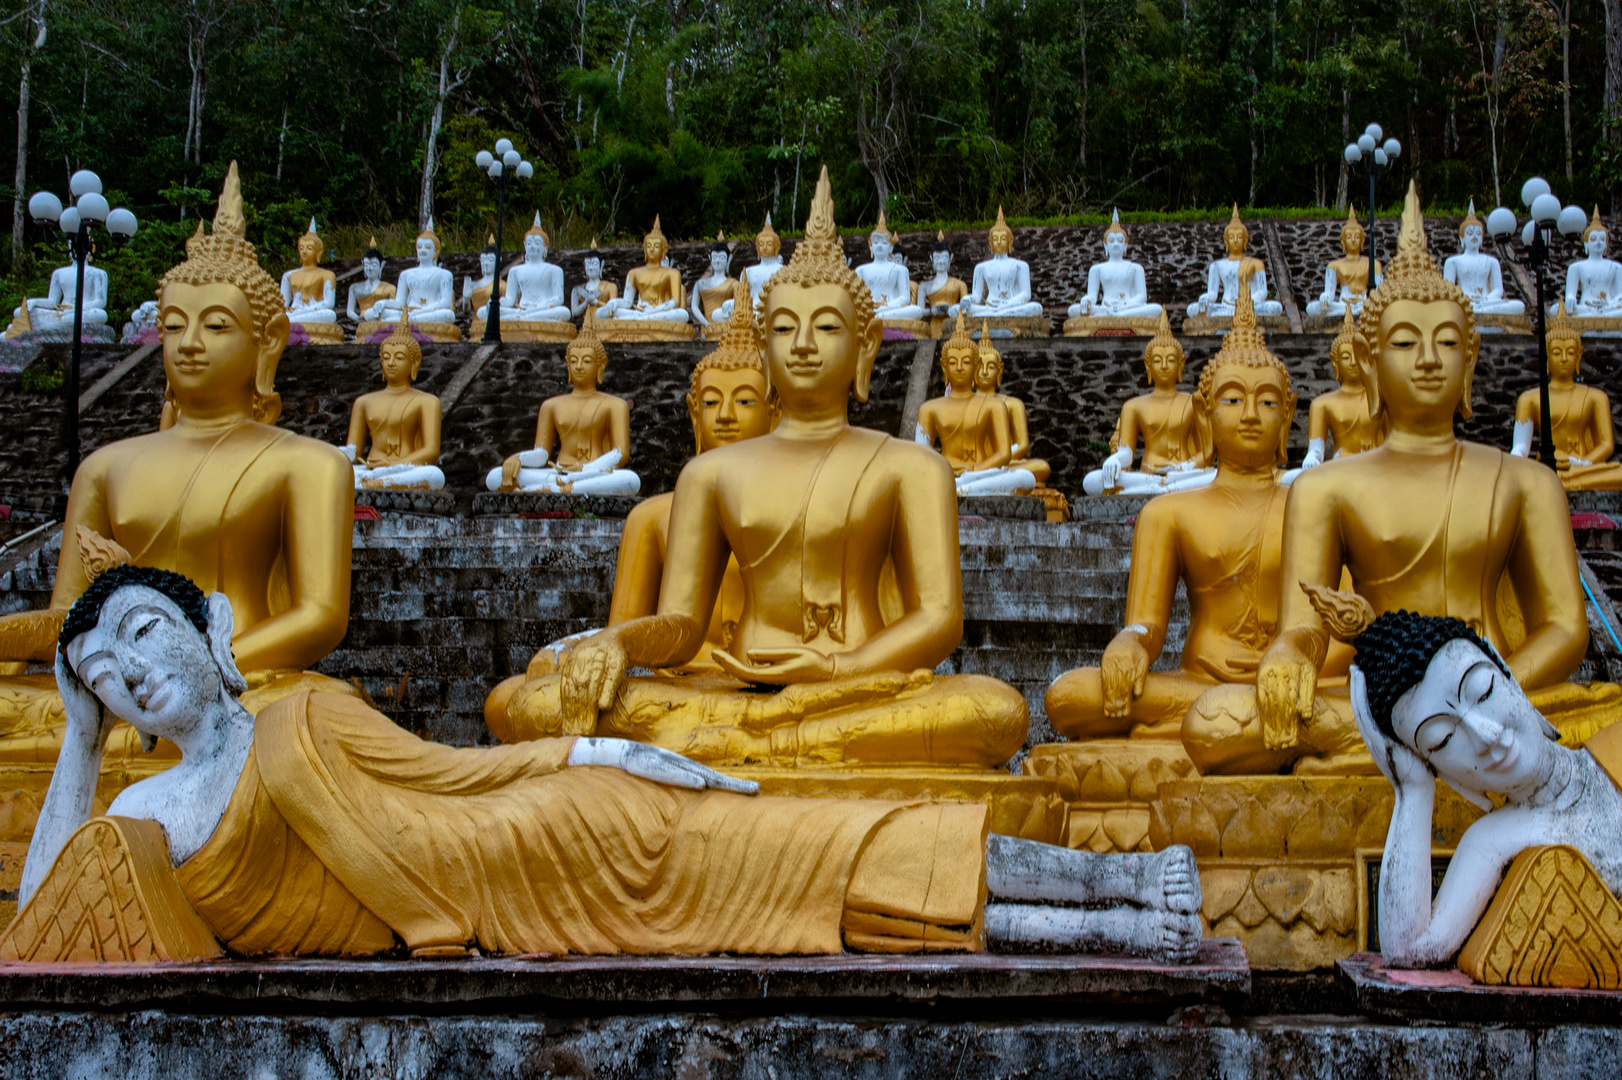 Hundreds of Buddha images in line